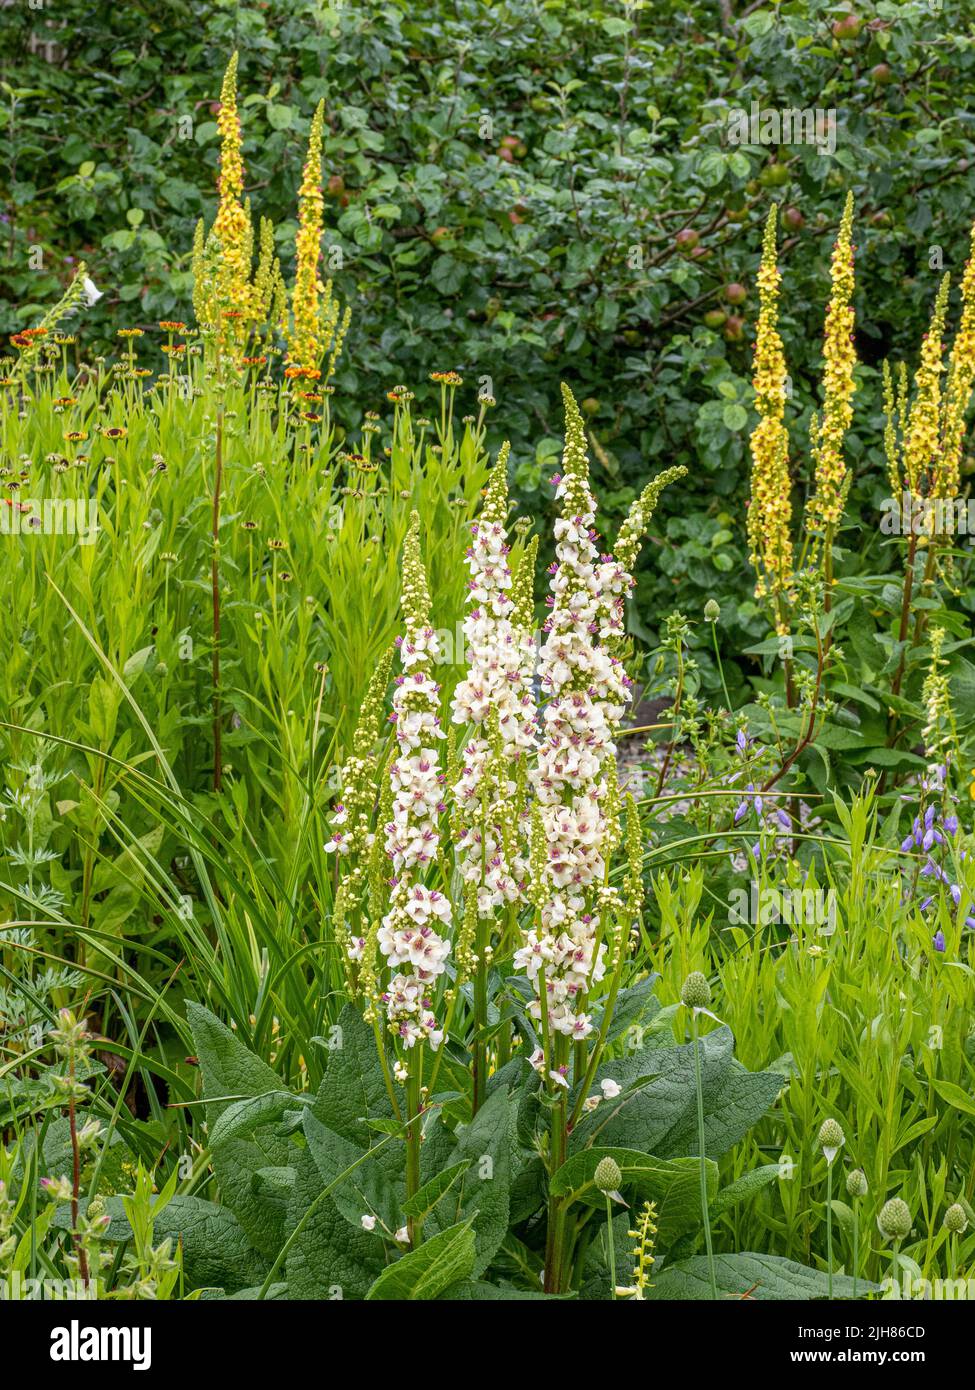 Spires of yellow and white perennial foxglove flowers in an English country garden Stock Photo